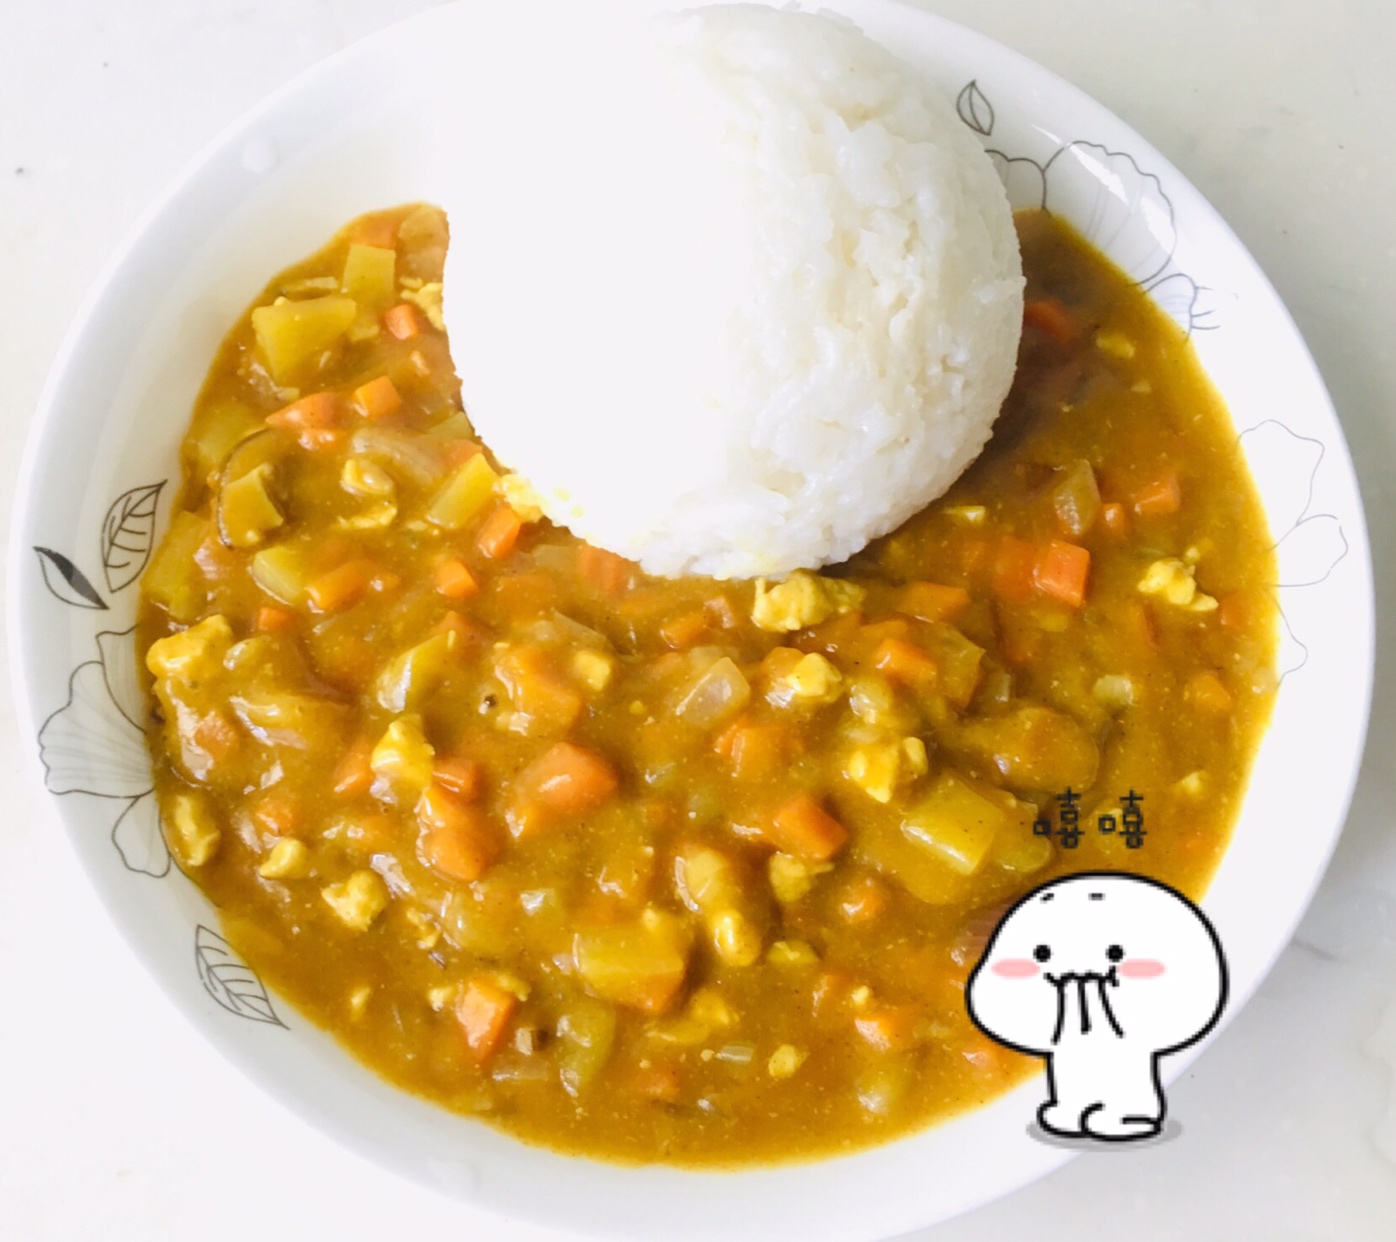 
The practice of curry meal, how is curry meal done delicious